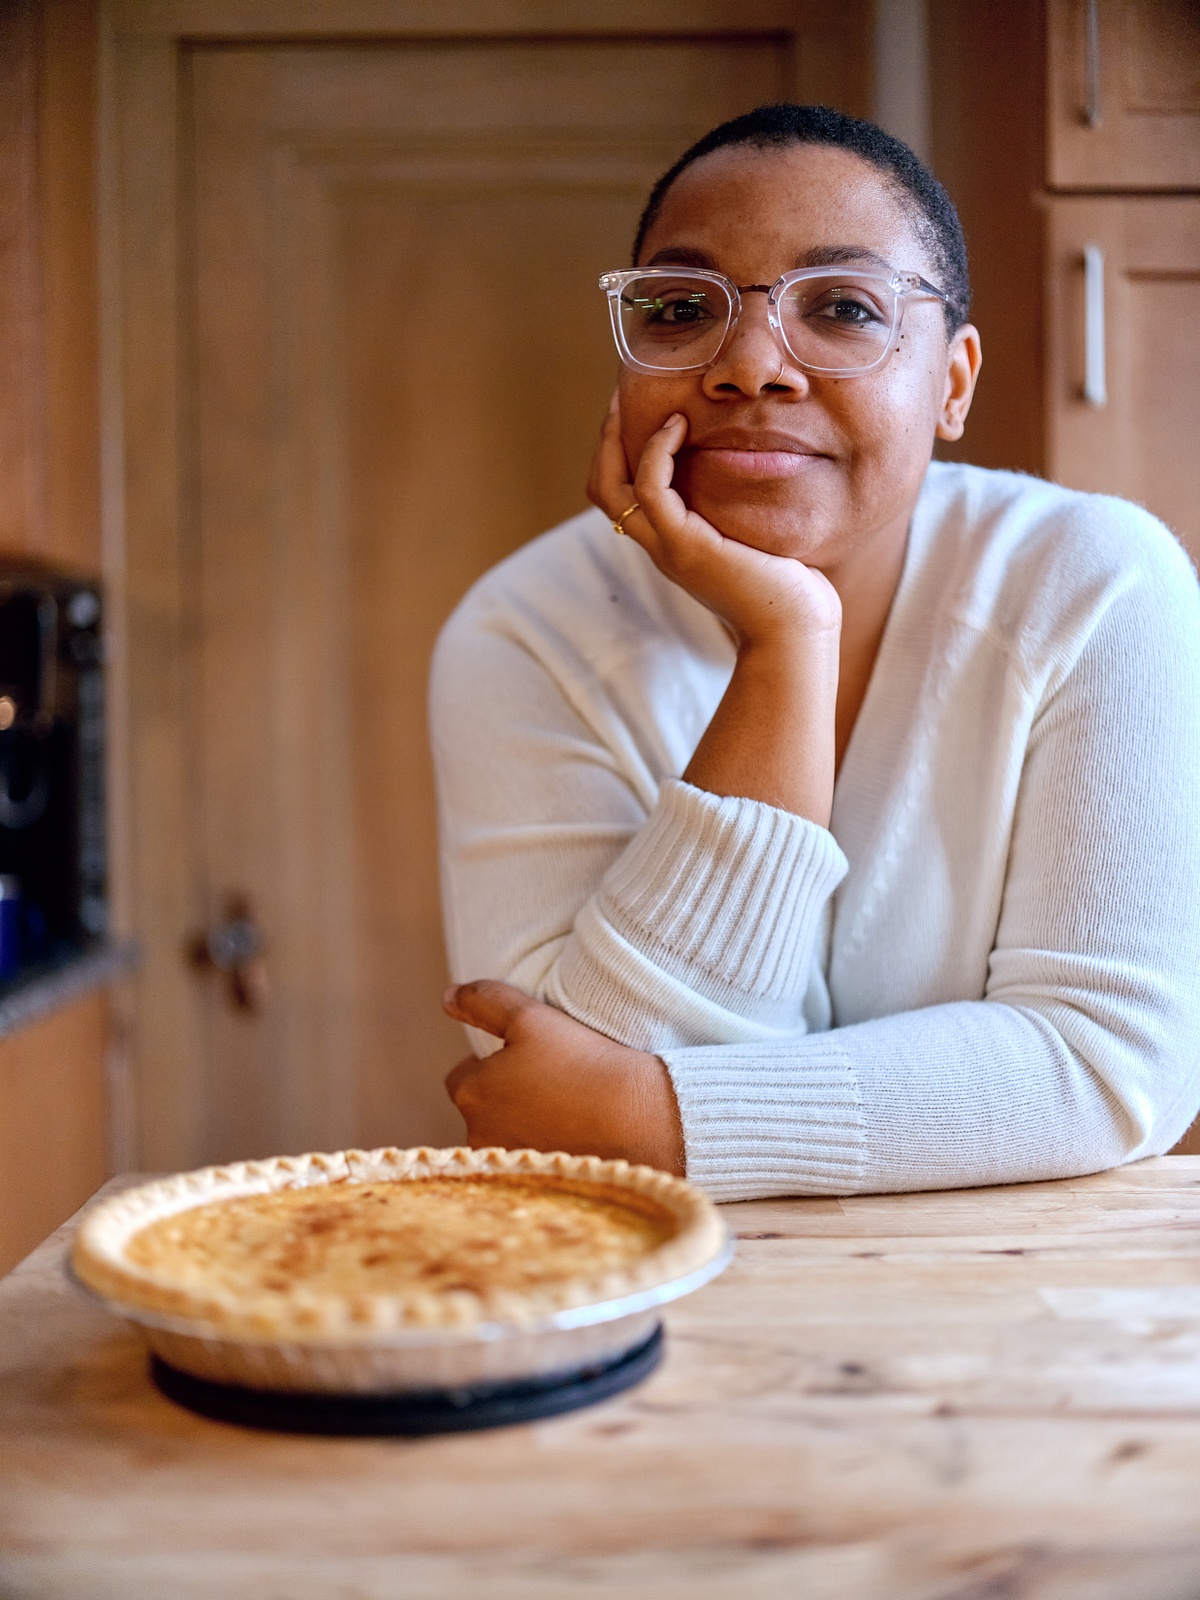 Person with medium skin, white sweater, and glasses leans on kitchen island resting hand on chin, with pie in front of them.